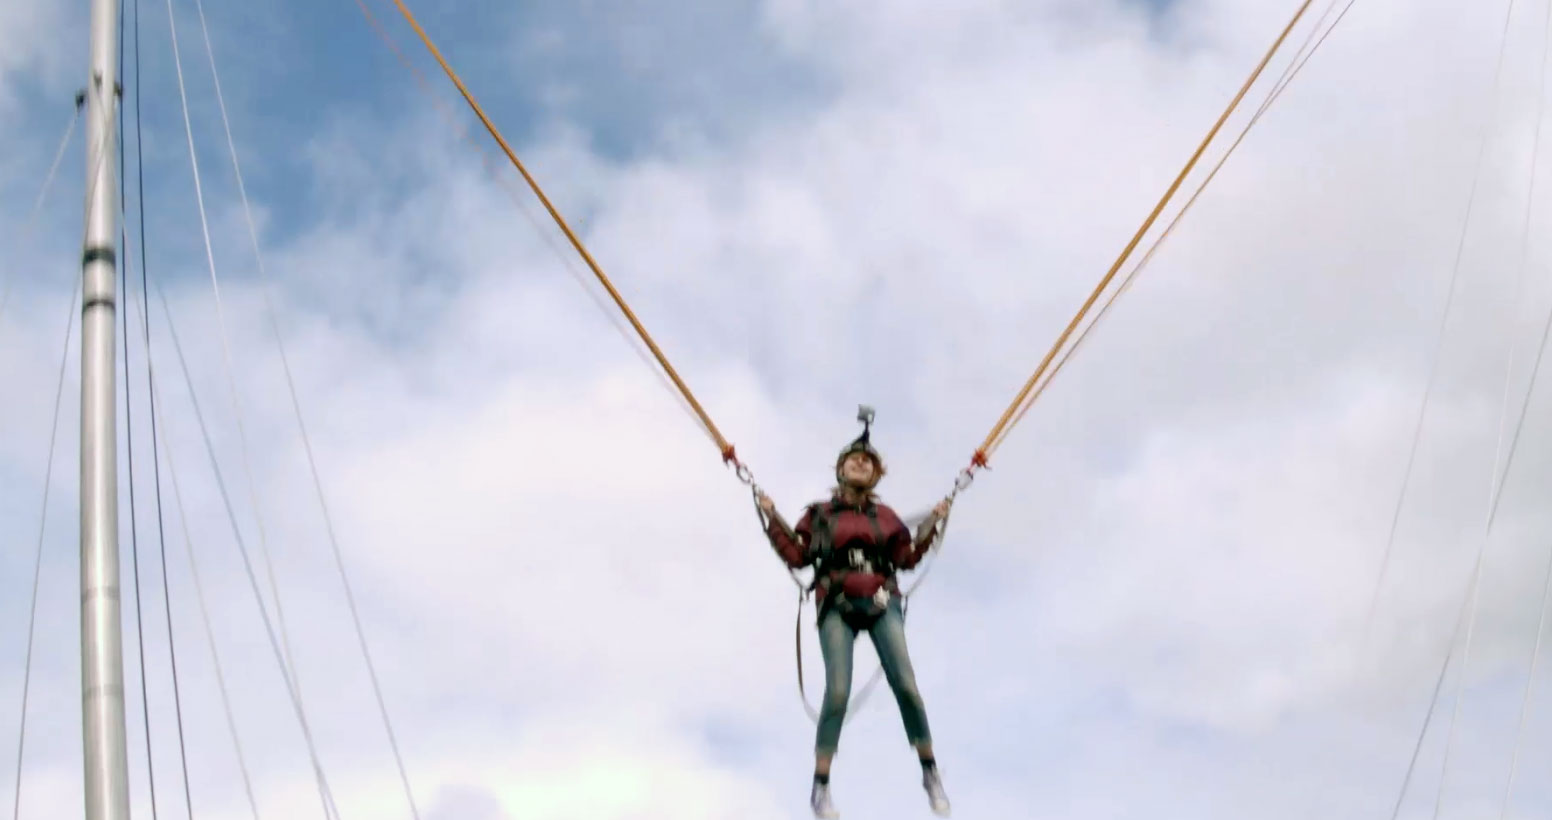 Shooting Star Vertical Bungy